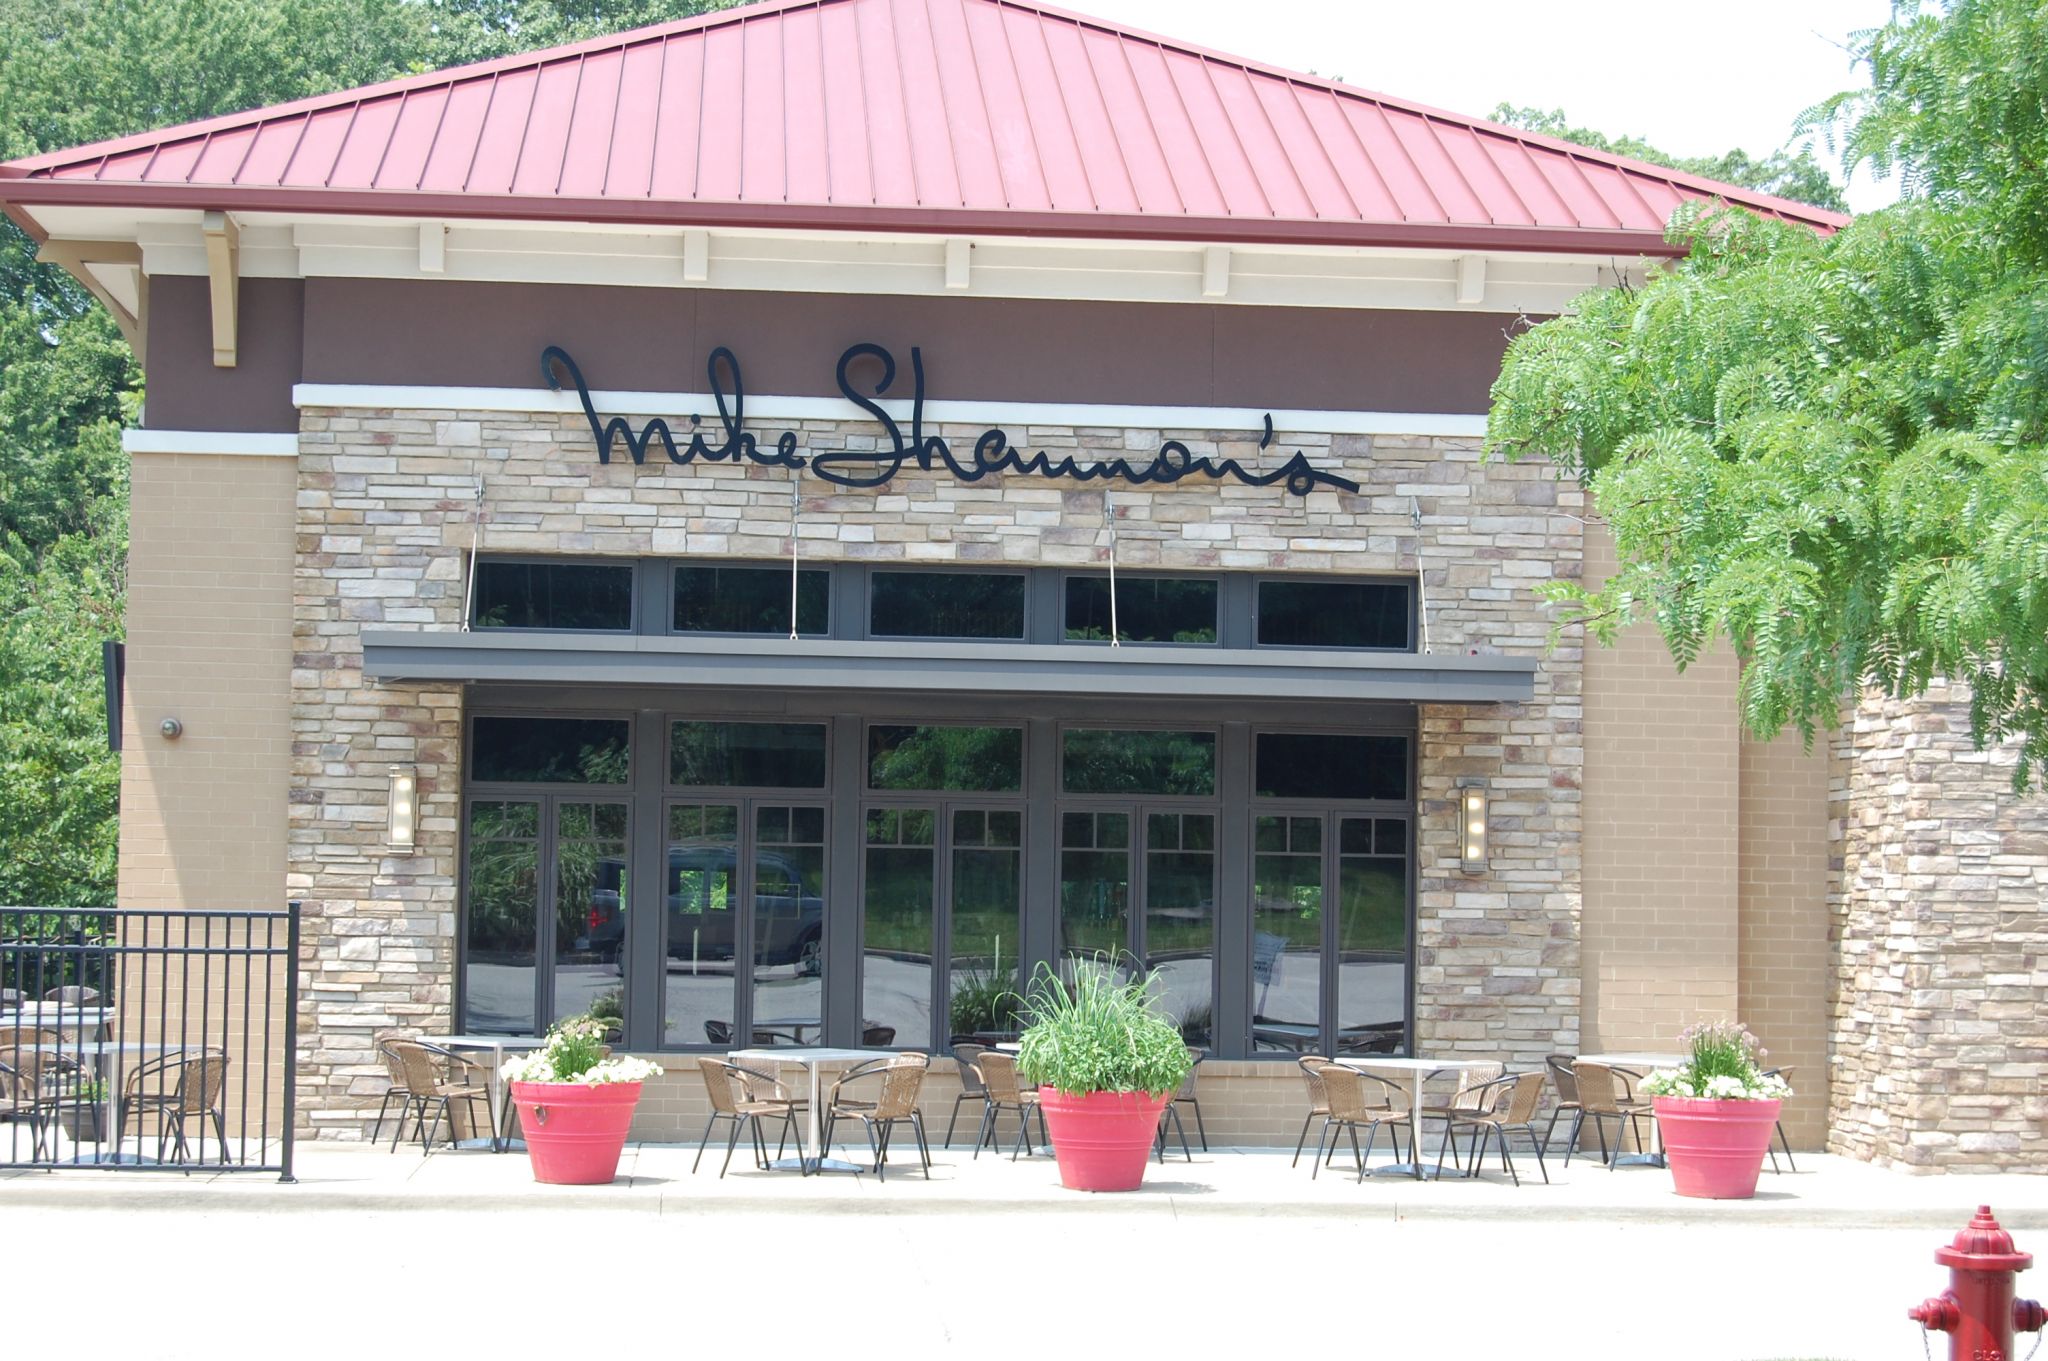 Mike Shannon's restaurant to close down